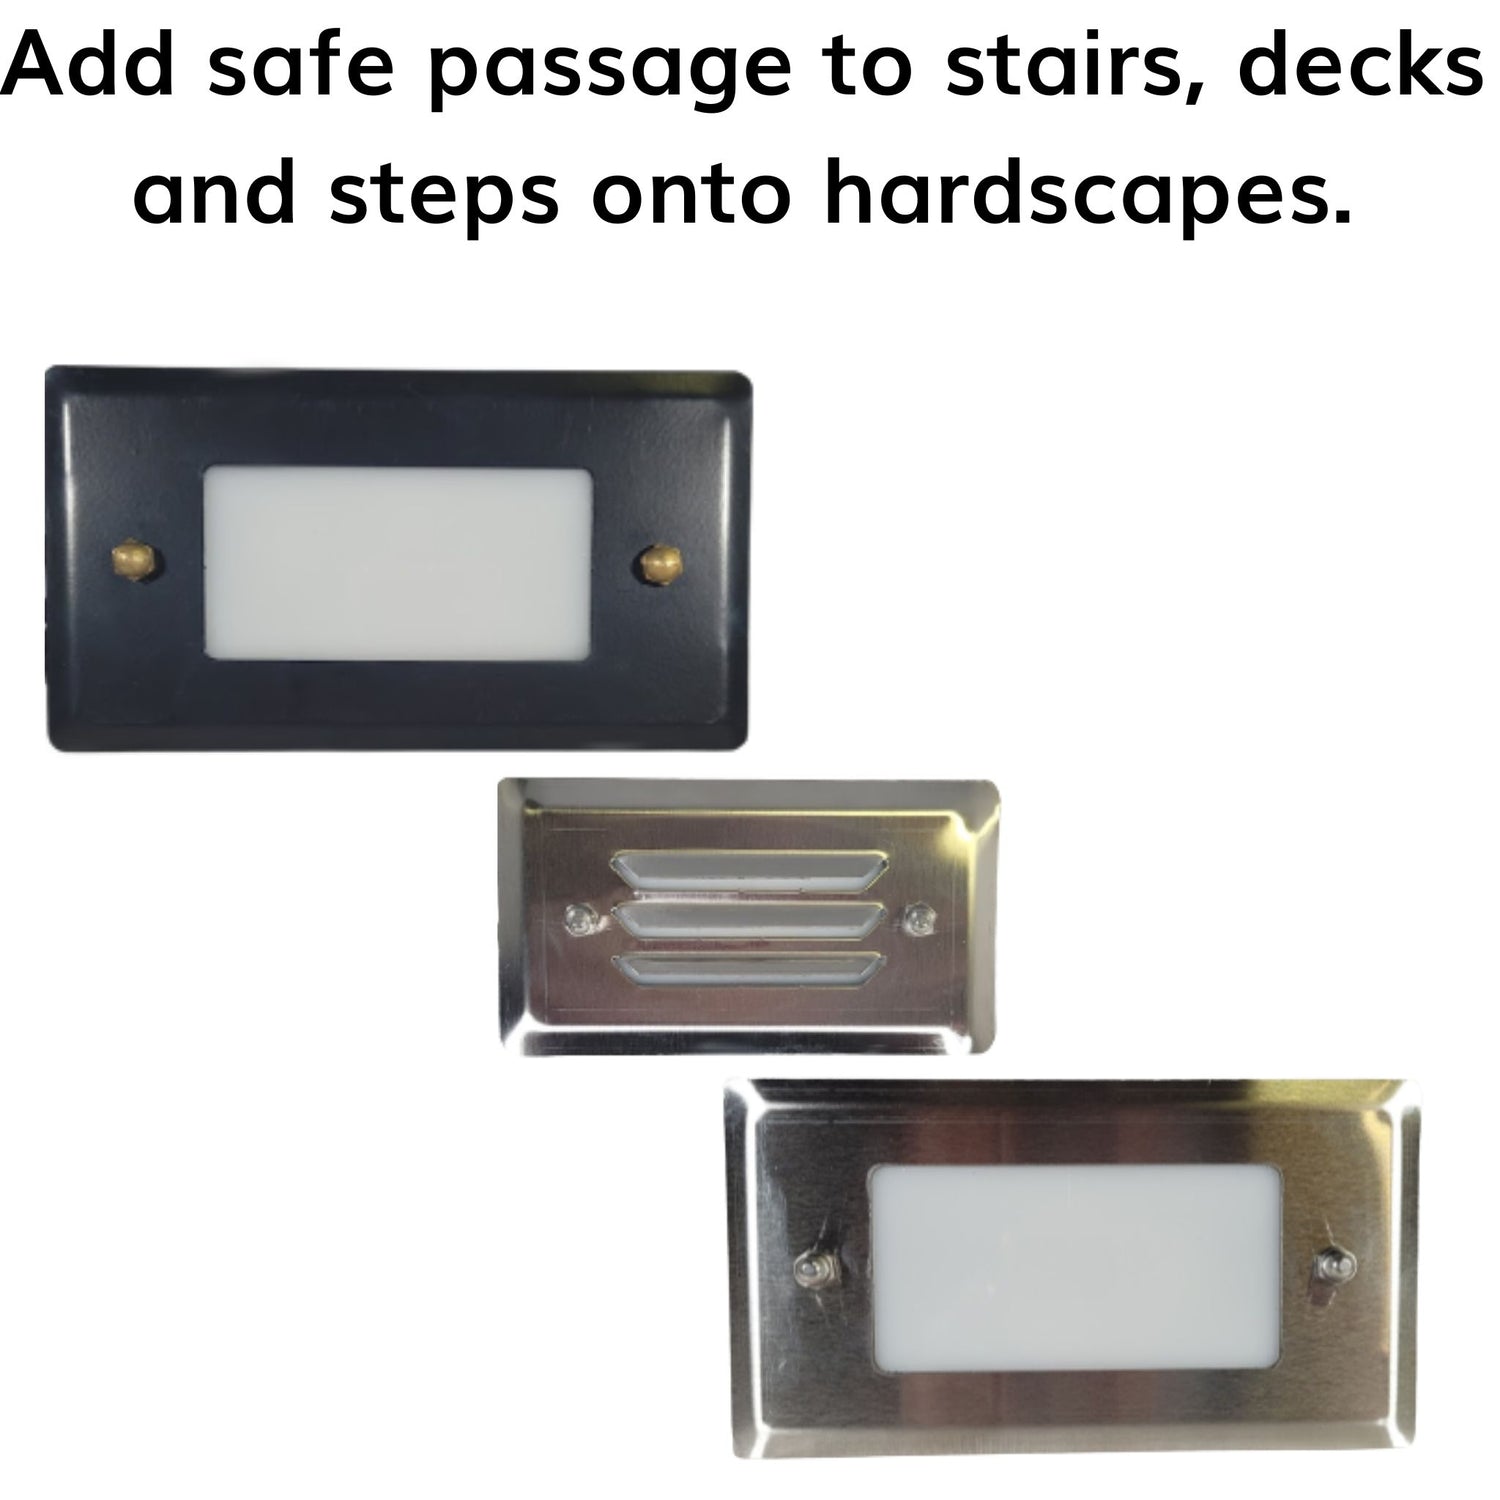 Add safe passage to stair, decks and septs with LED Step Lights.